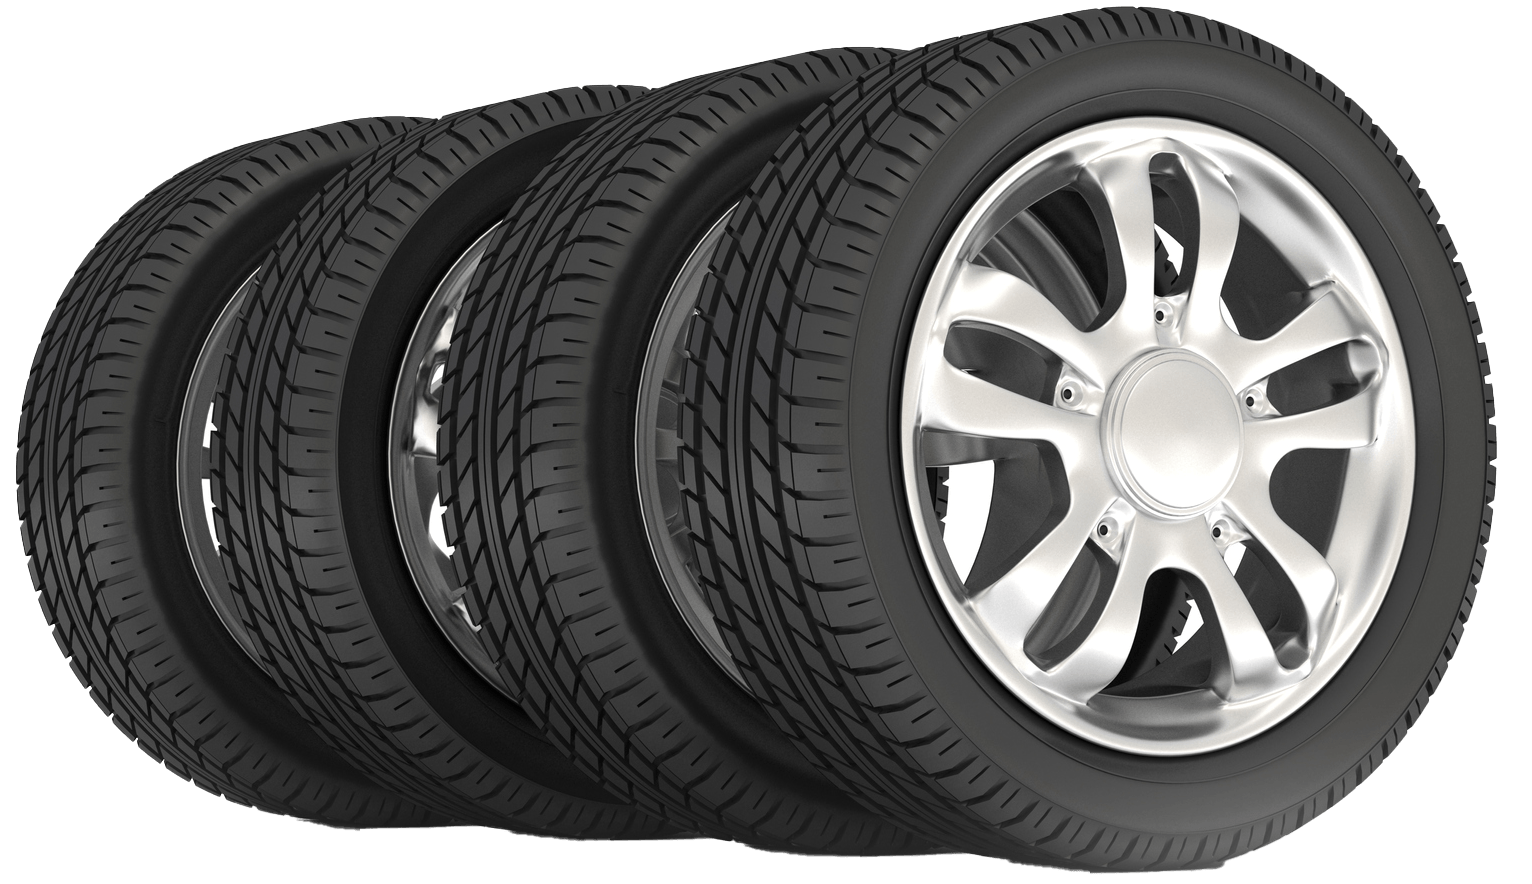 Four Piece of Tyres | Helensvale, Qld | Ashtons Removals